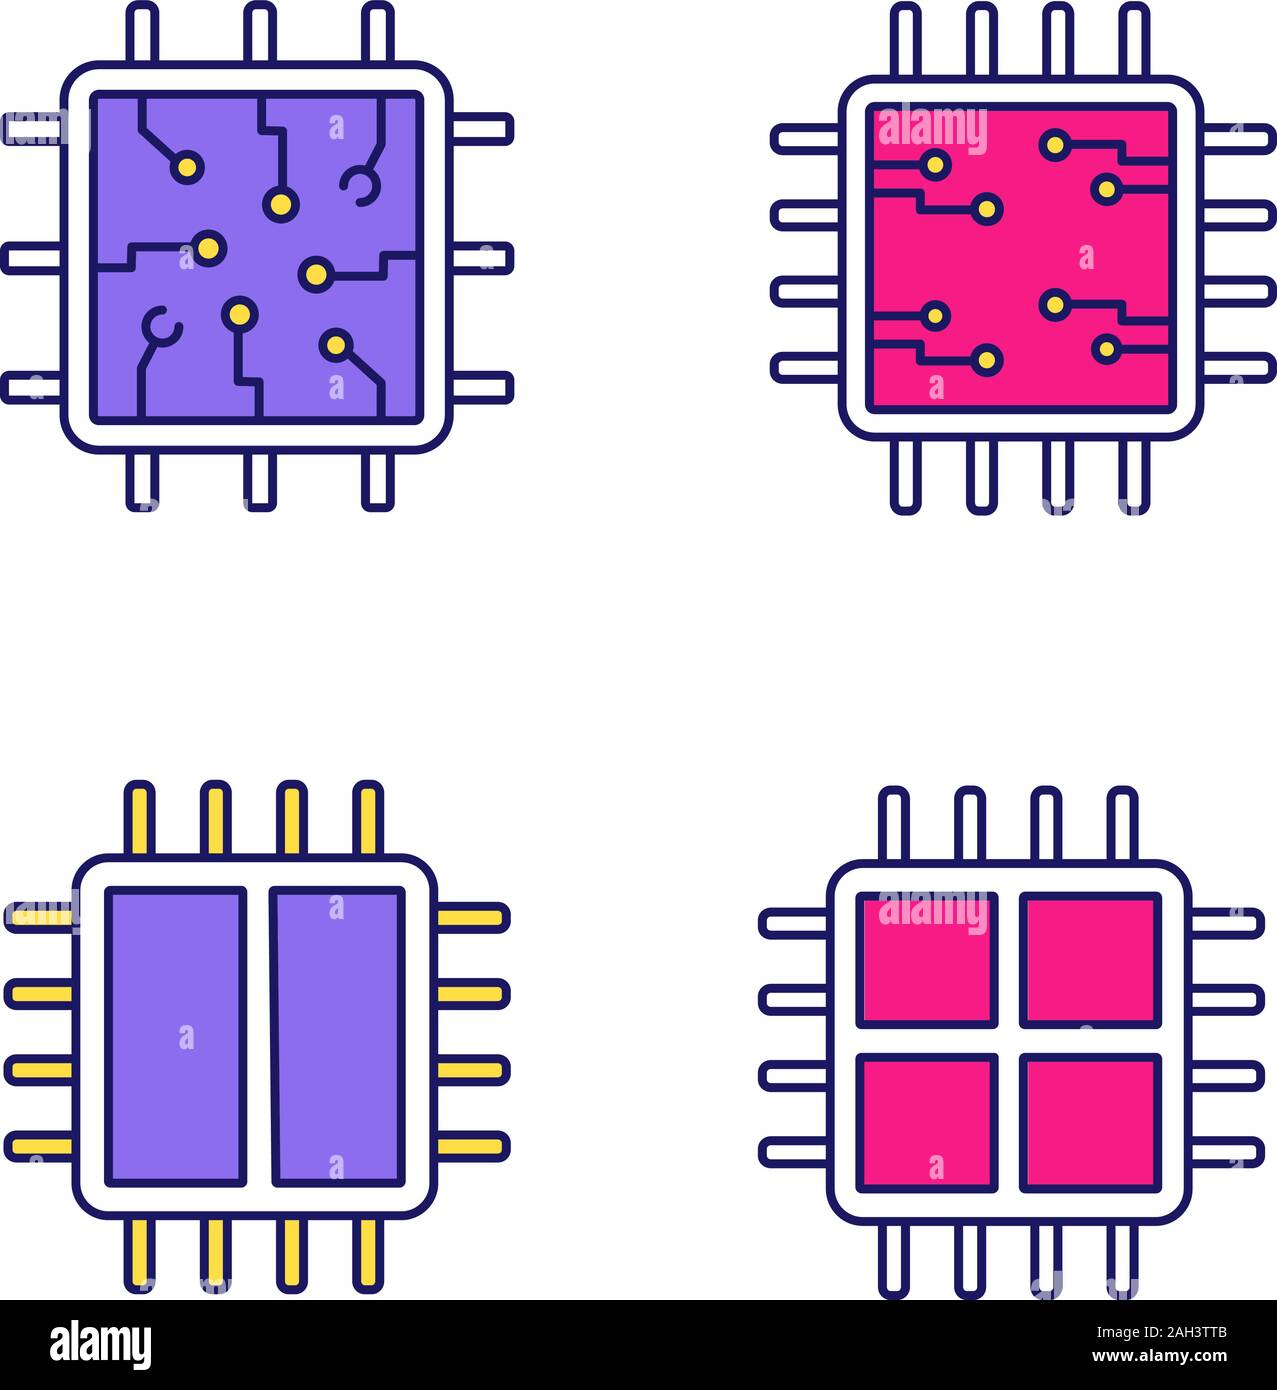 Processors color icon. Chip, microprocessor, integrated unit, dual and quad core processors. Isolated vector illustration Stock Vector